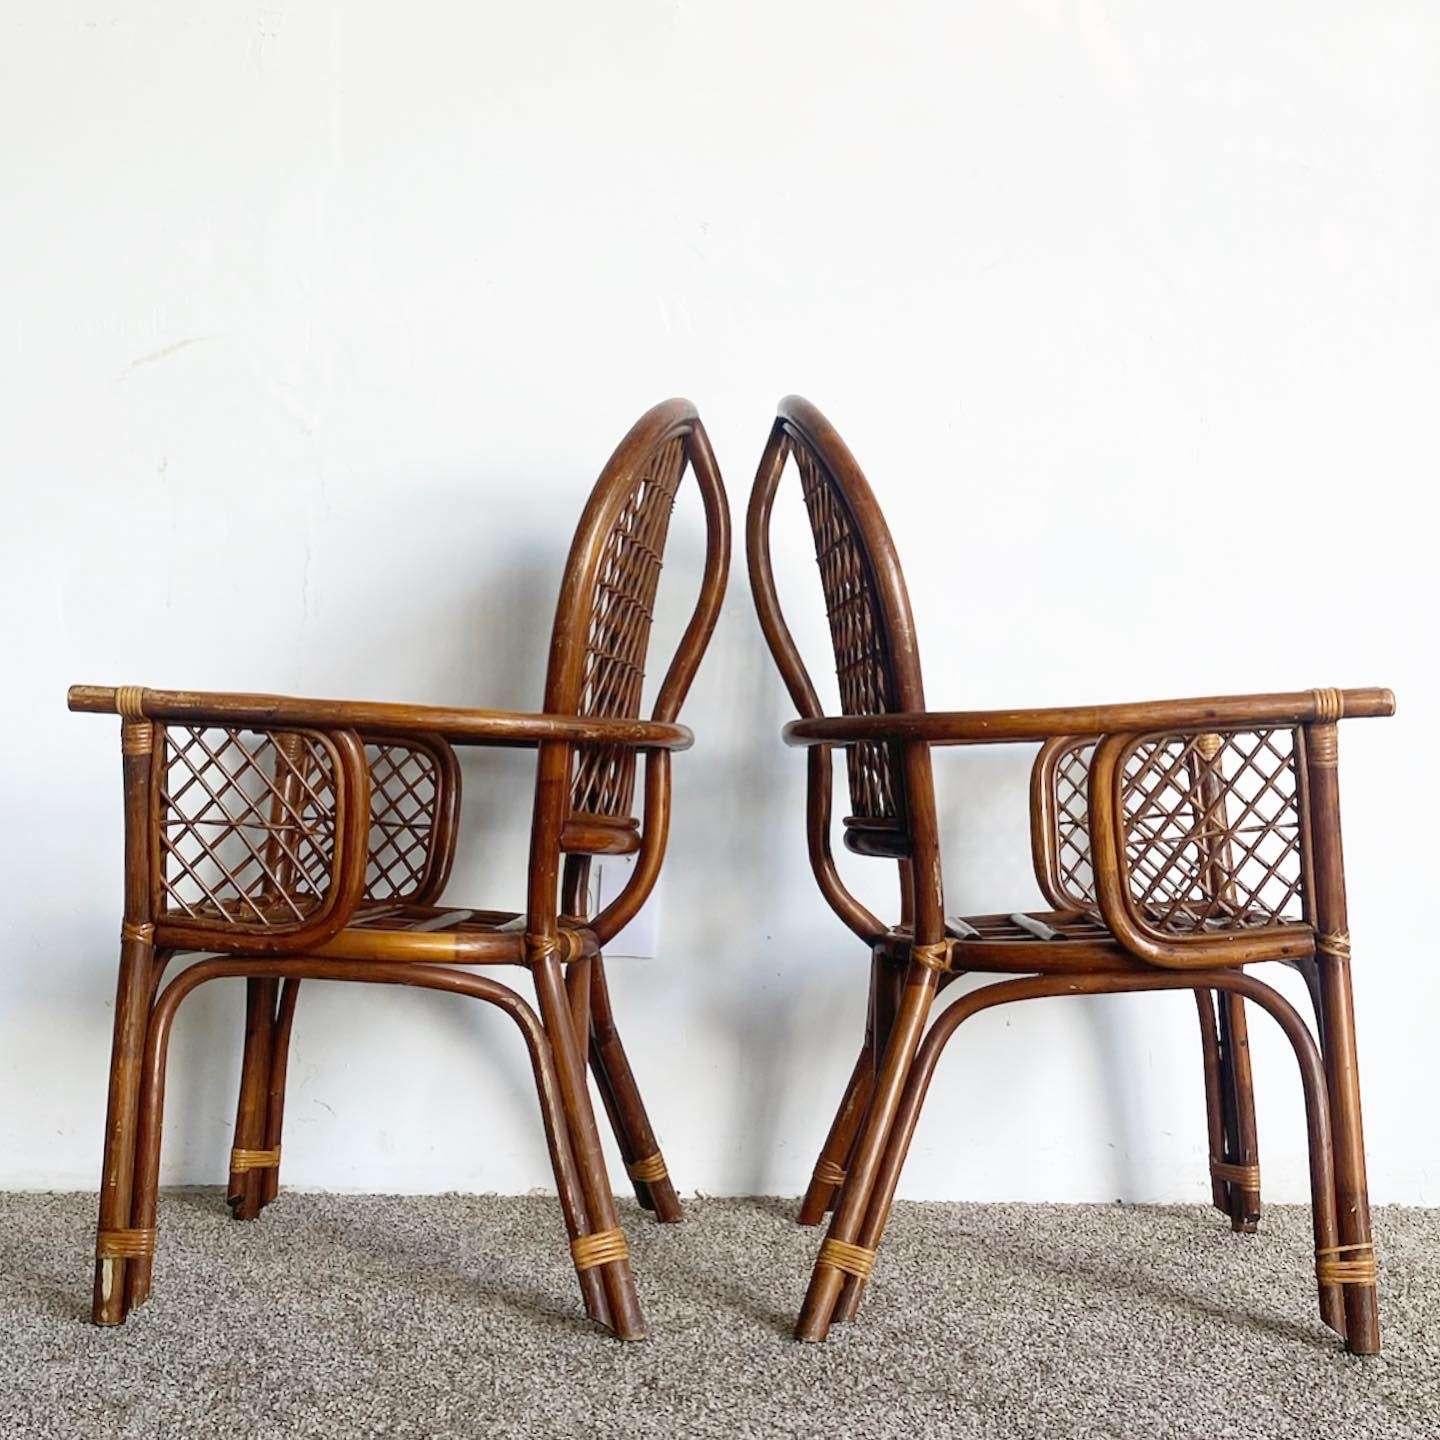 Late 20th Century Boho Chic Bamboo Rattan Balloon Back Arm Chairs - Set of 4 For Sale